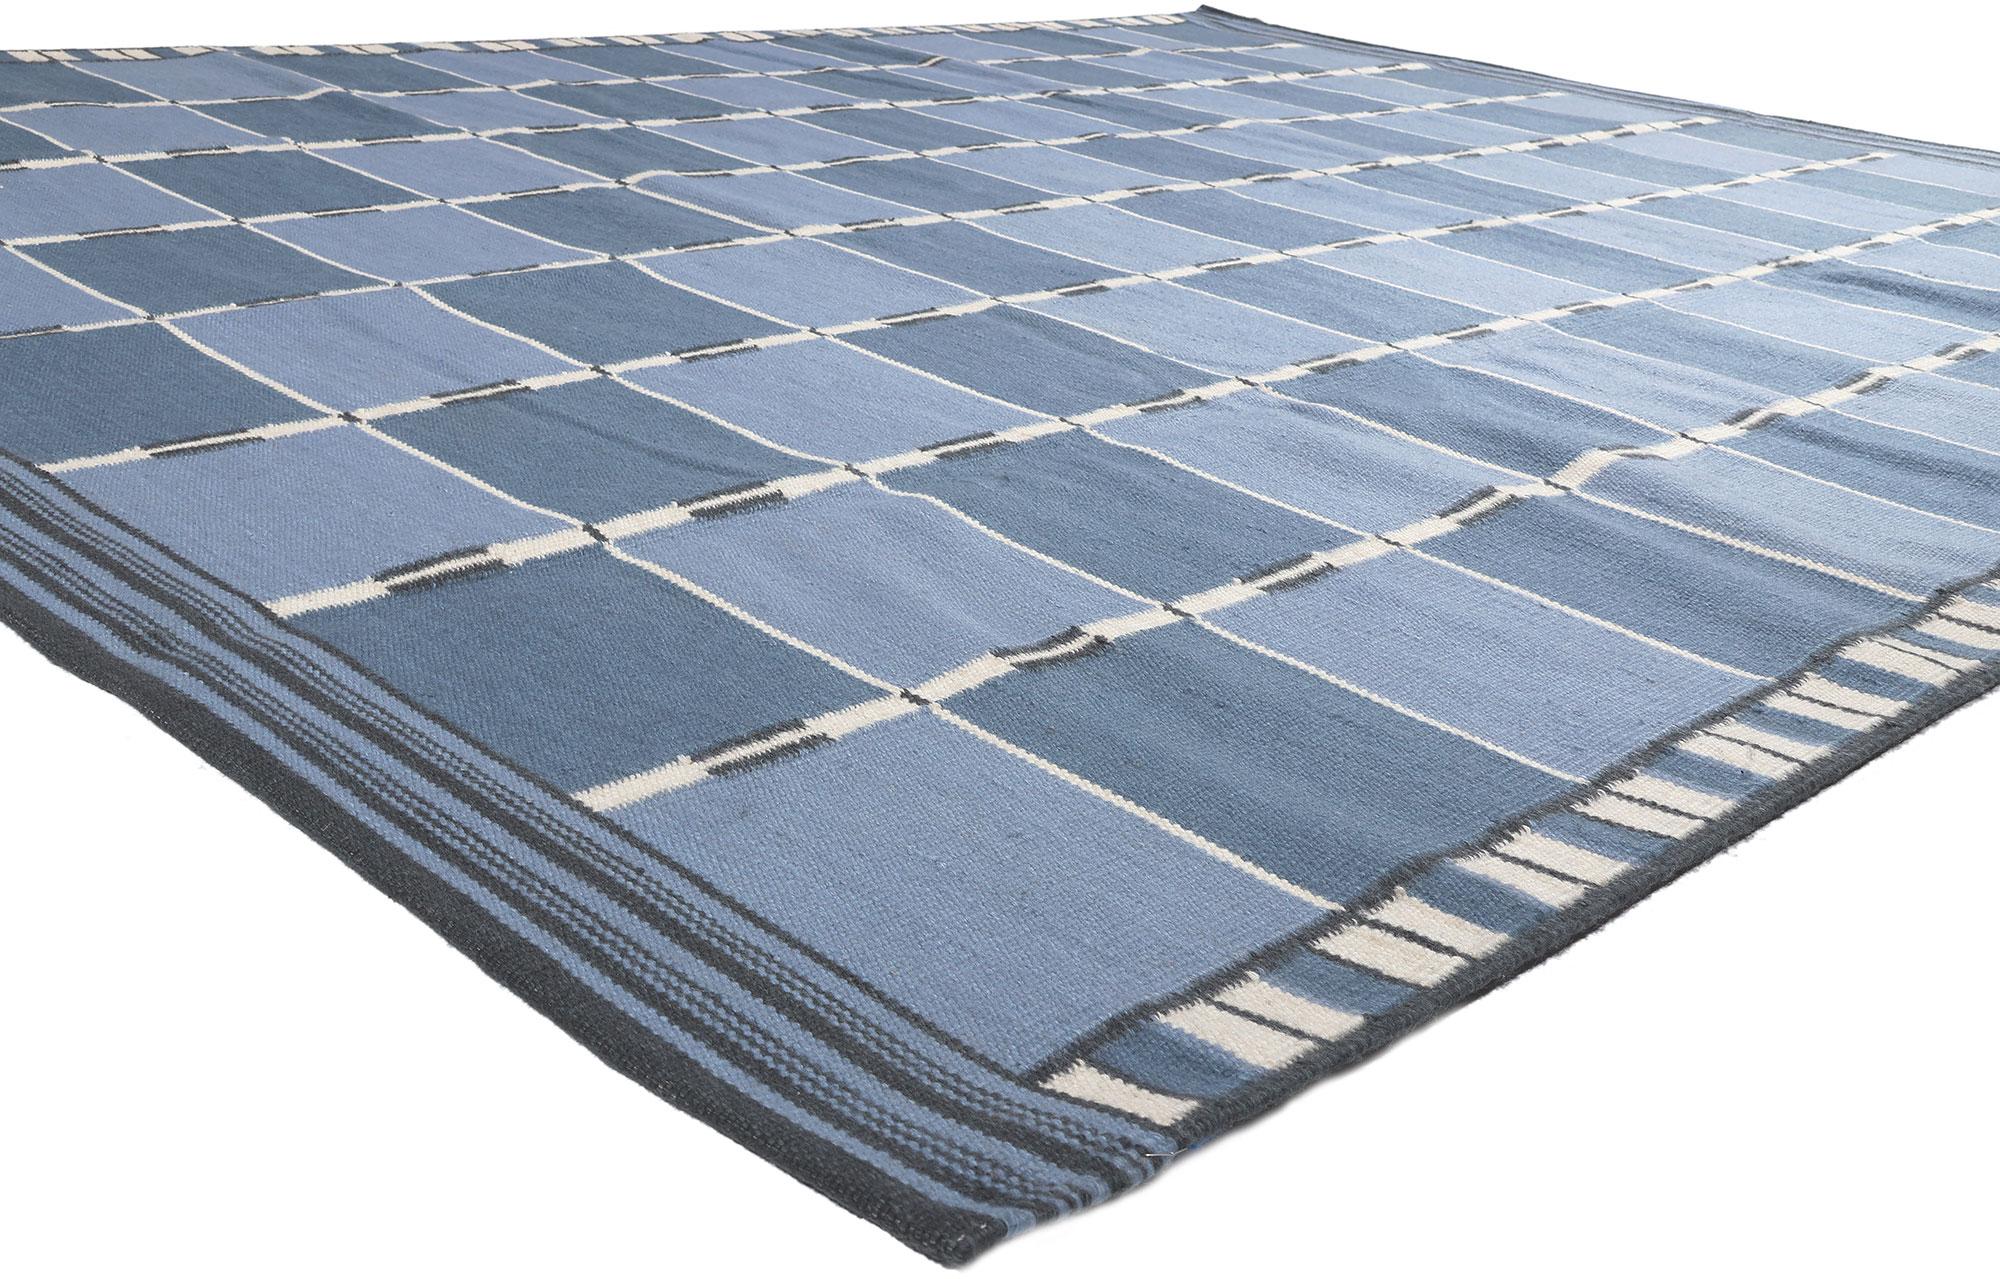 30941 New Swedish Inspired Kilim Rug, 10'02 x 12'10. Displaying simplicity with incredible detail and texture, this handwoven wool Swedish inspired Kilim rug provides a feeling of cozy contentment without the clutter. The eye-catching checked design